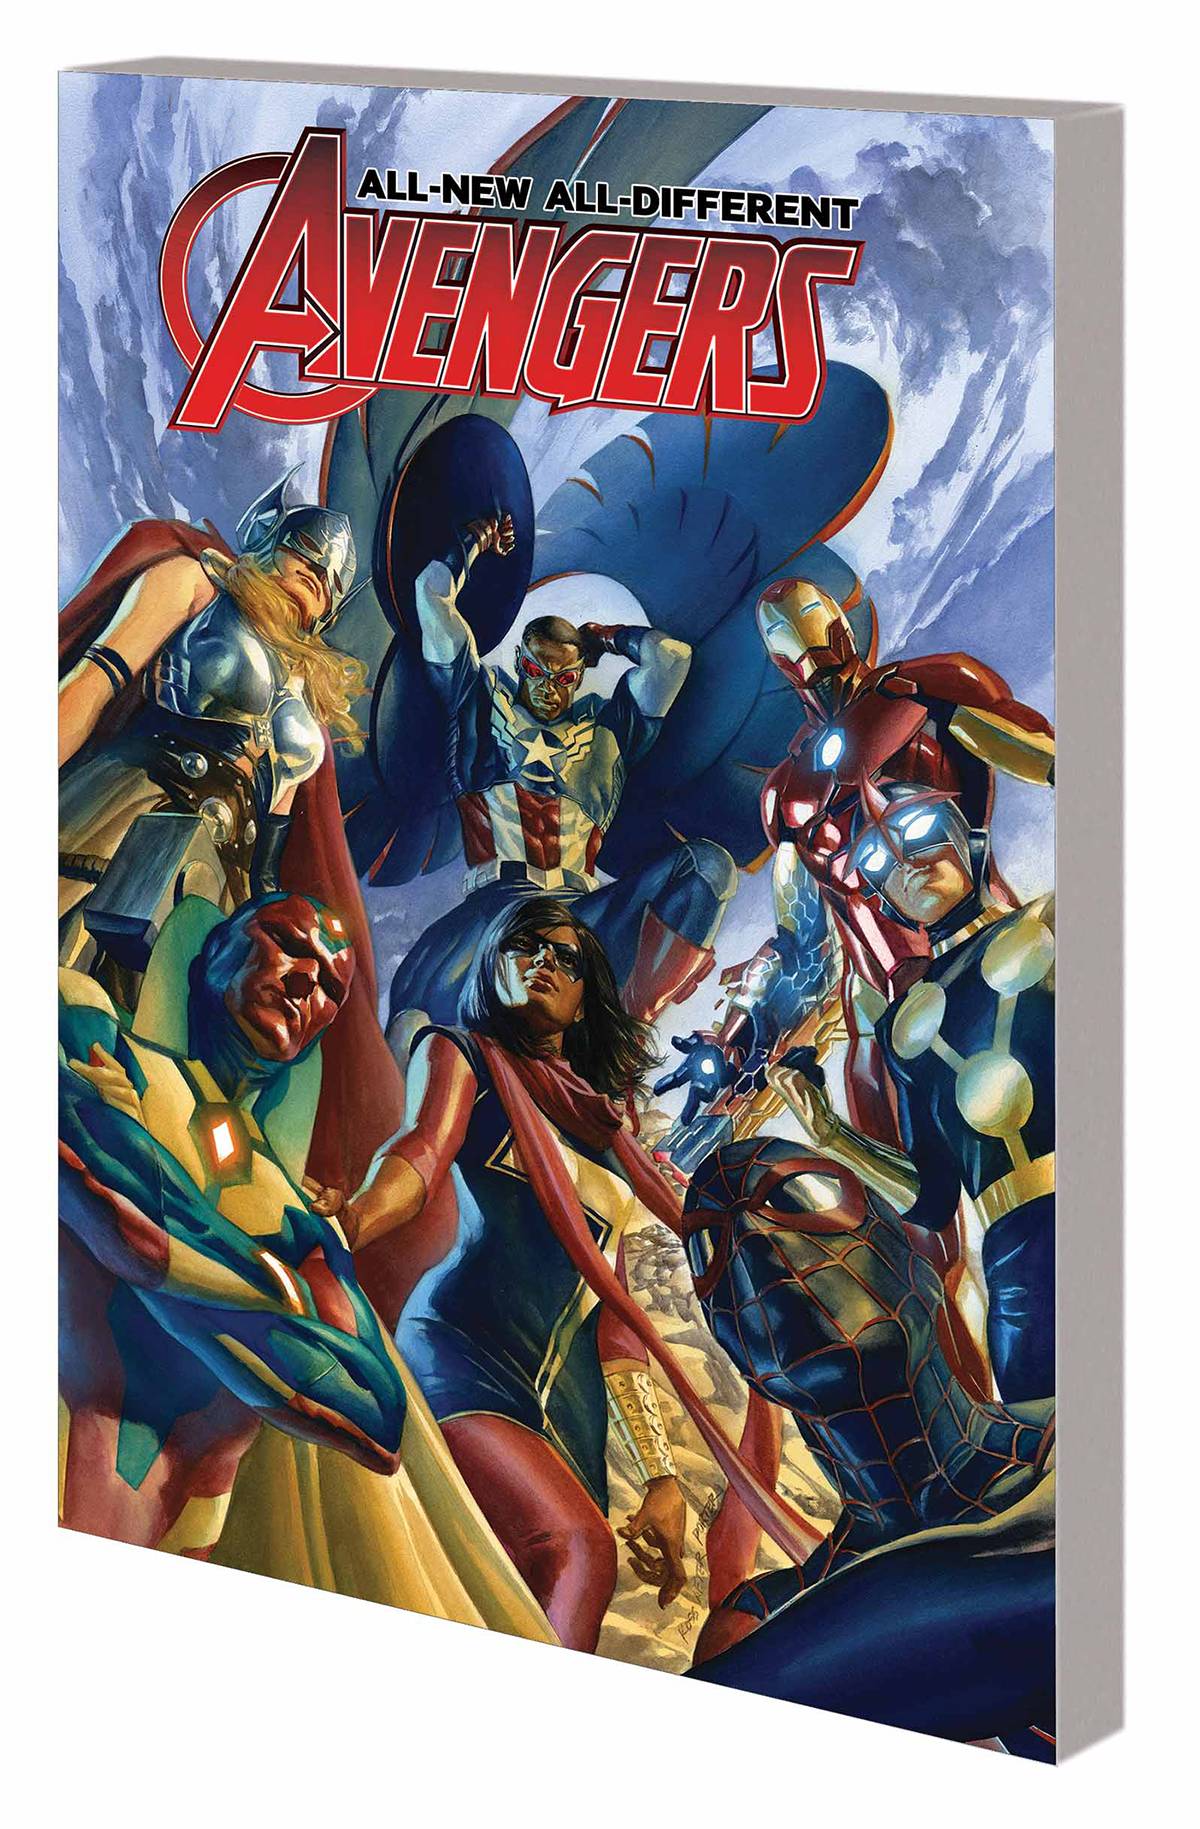 ALL-NEW, ALL-DIFFERENT AVENGERS VOL 01: THE MAGNIFICENT SEVEN